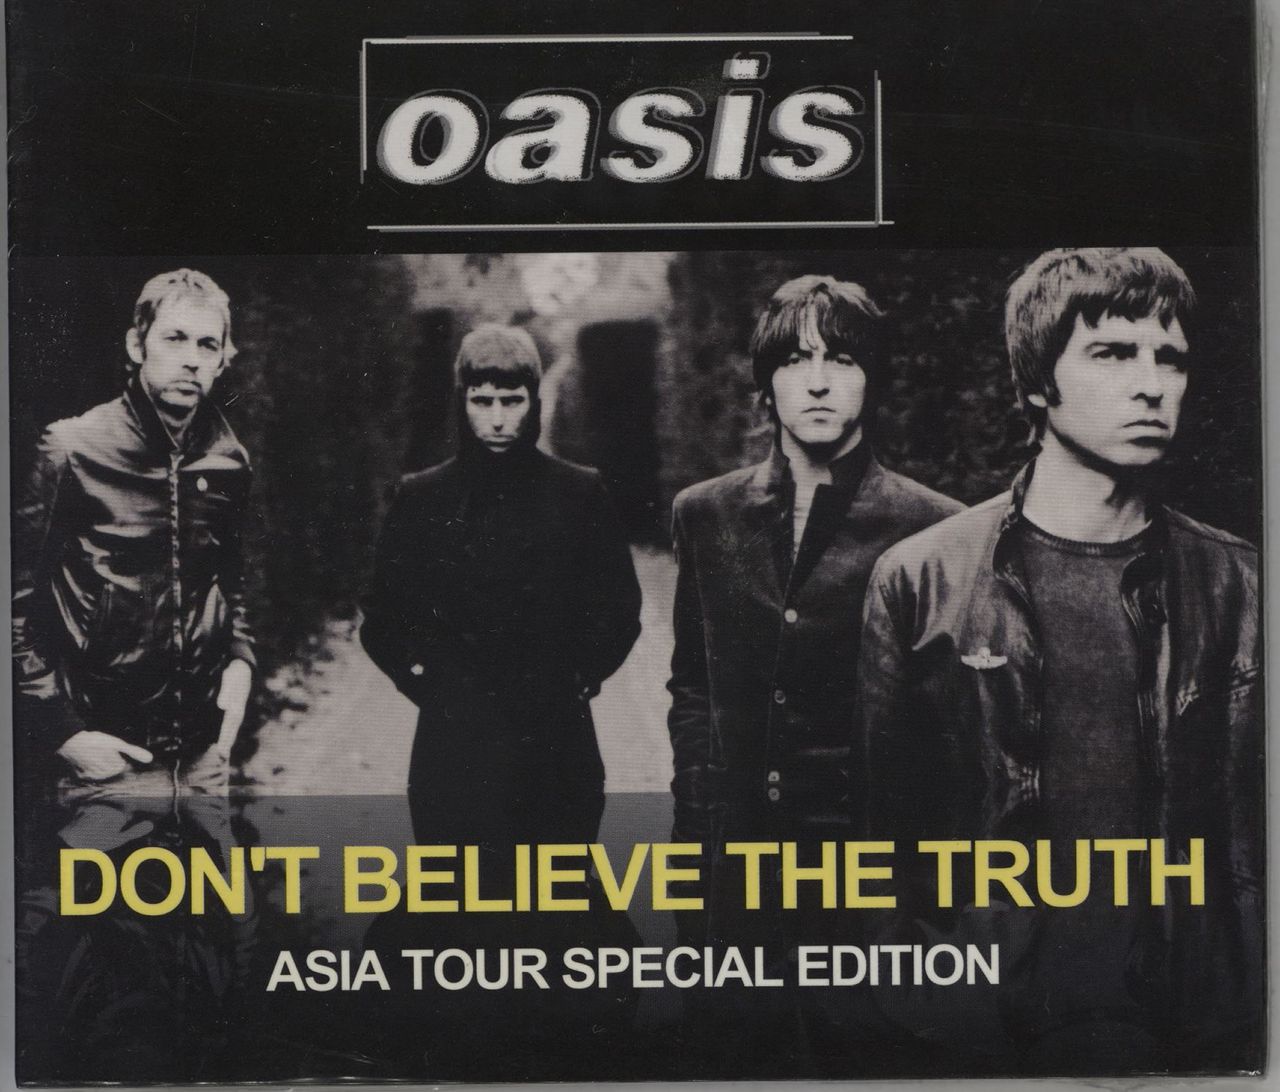 Oasis Don't Believe The Truth - Sealed Hong Kong 2-CD album set